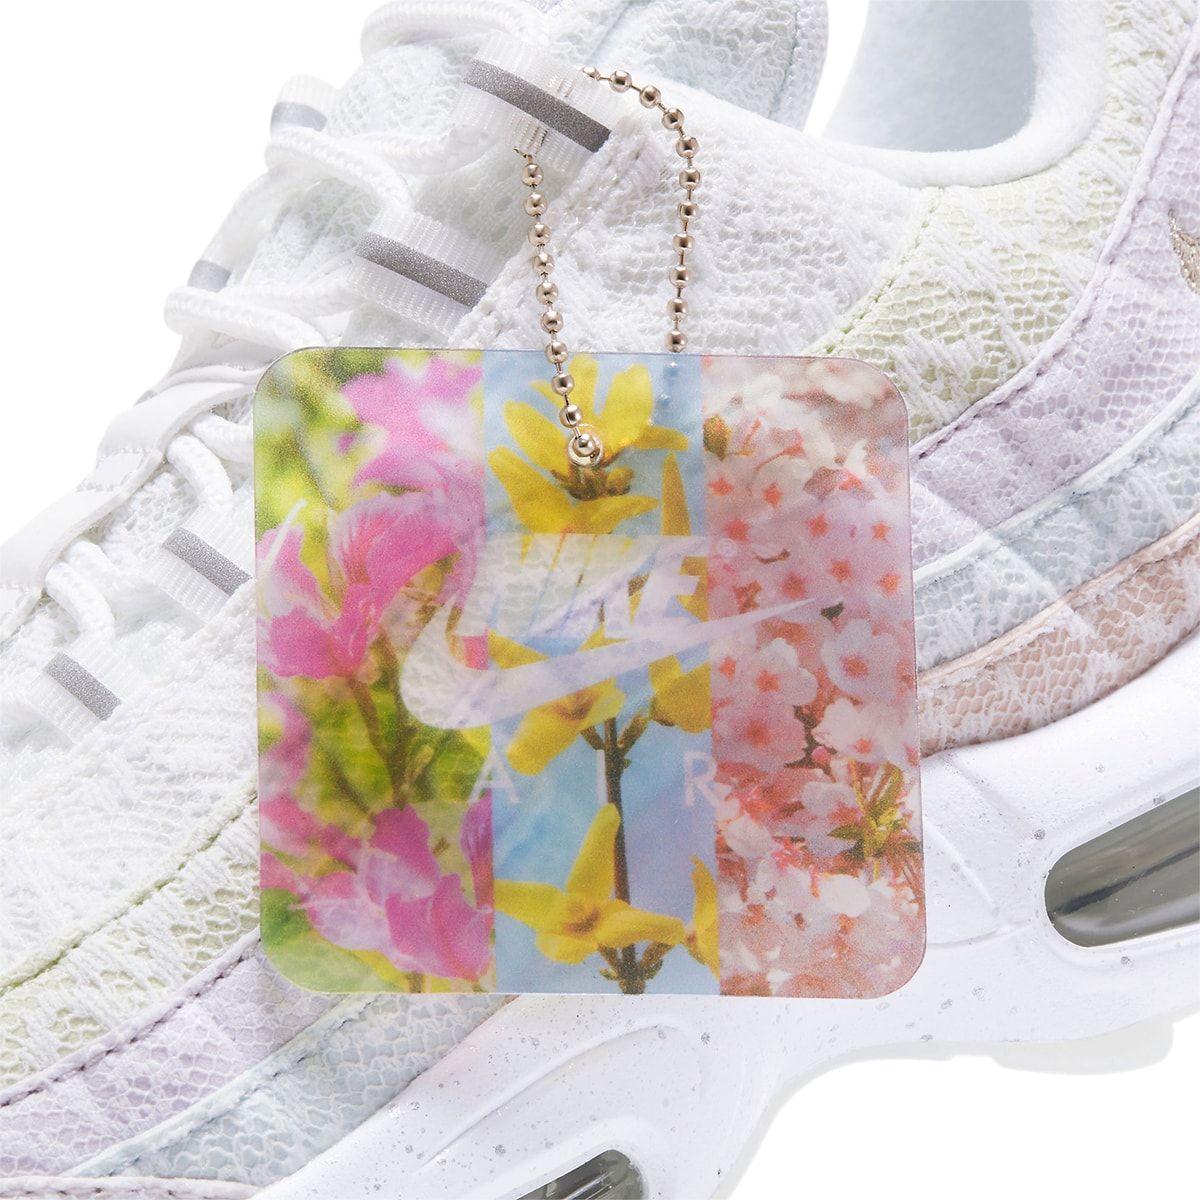 Nike Air Max 95 “Spring Flower” is the 